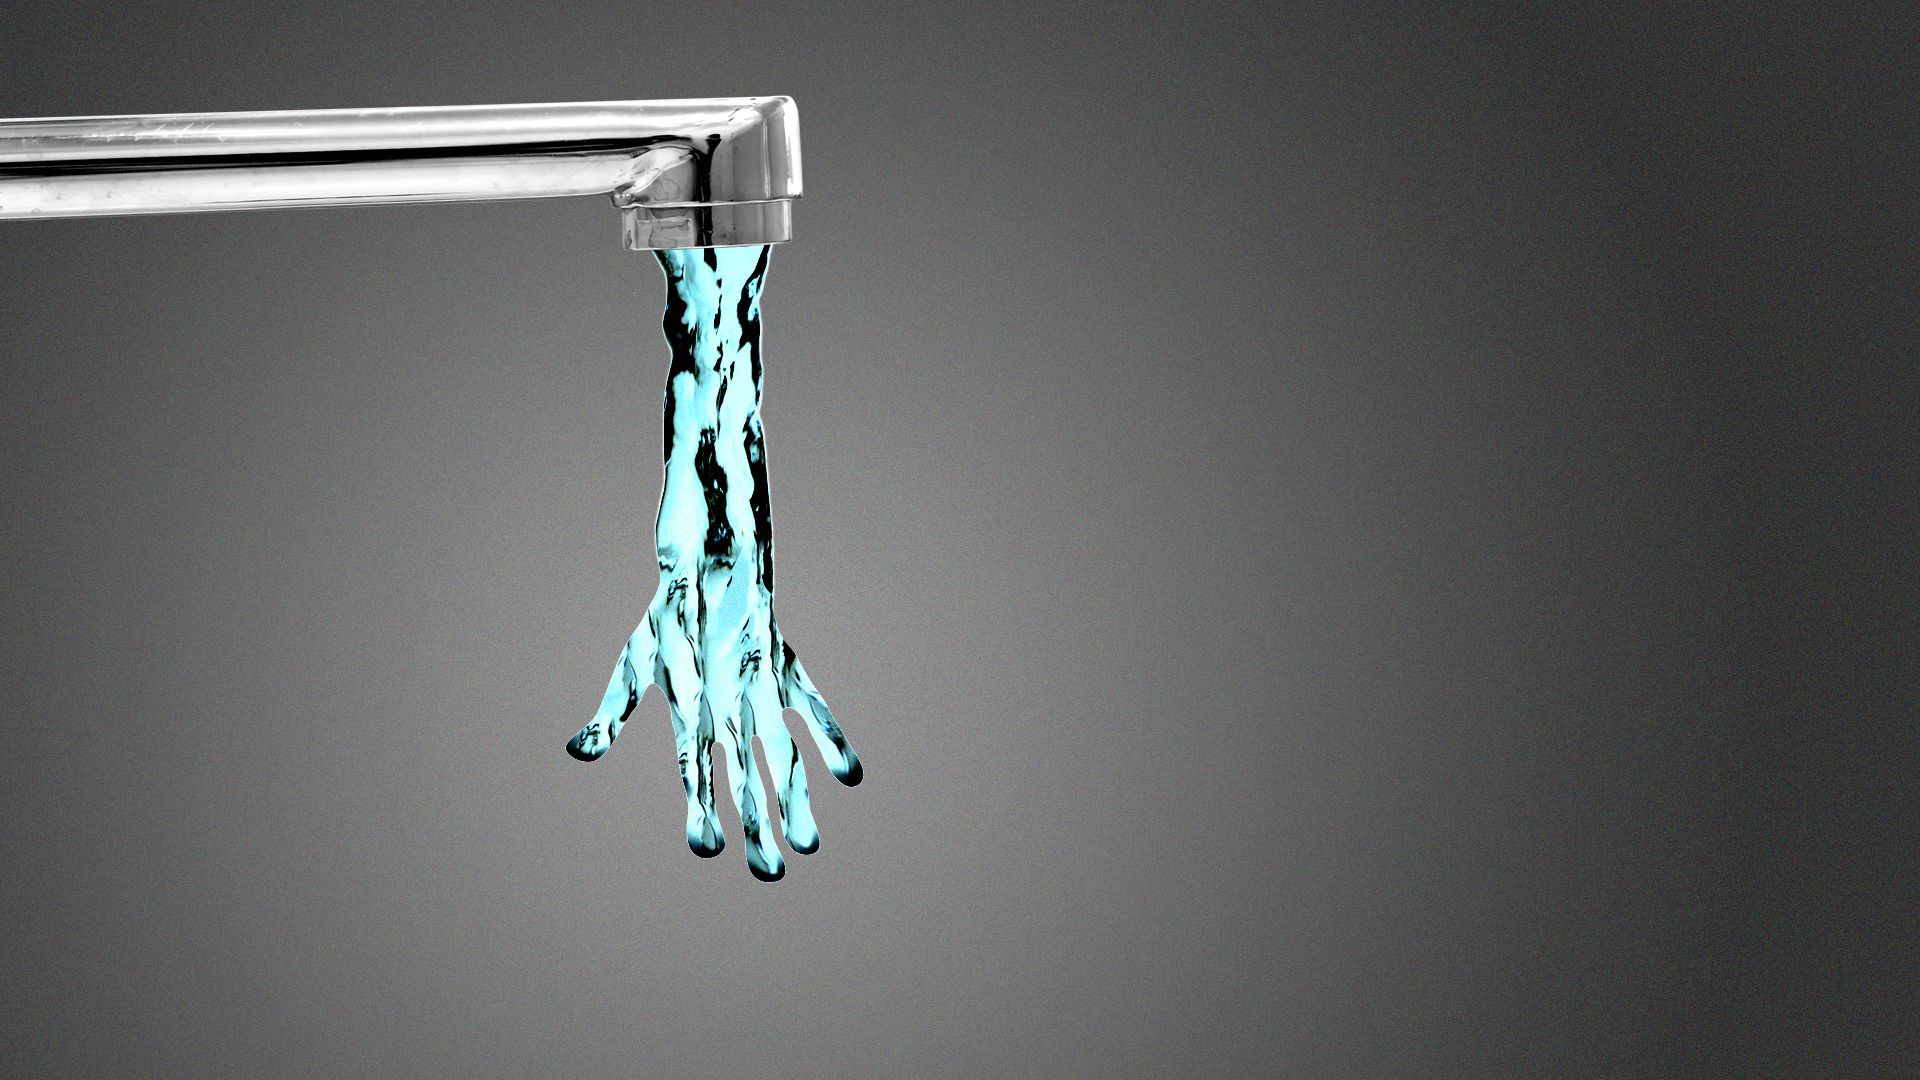 Illustration of a hand made of water coming out of a faucet.